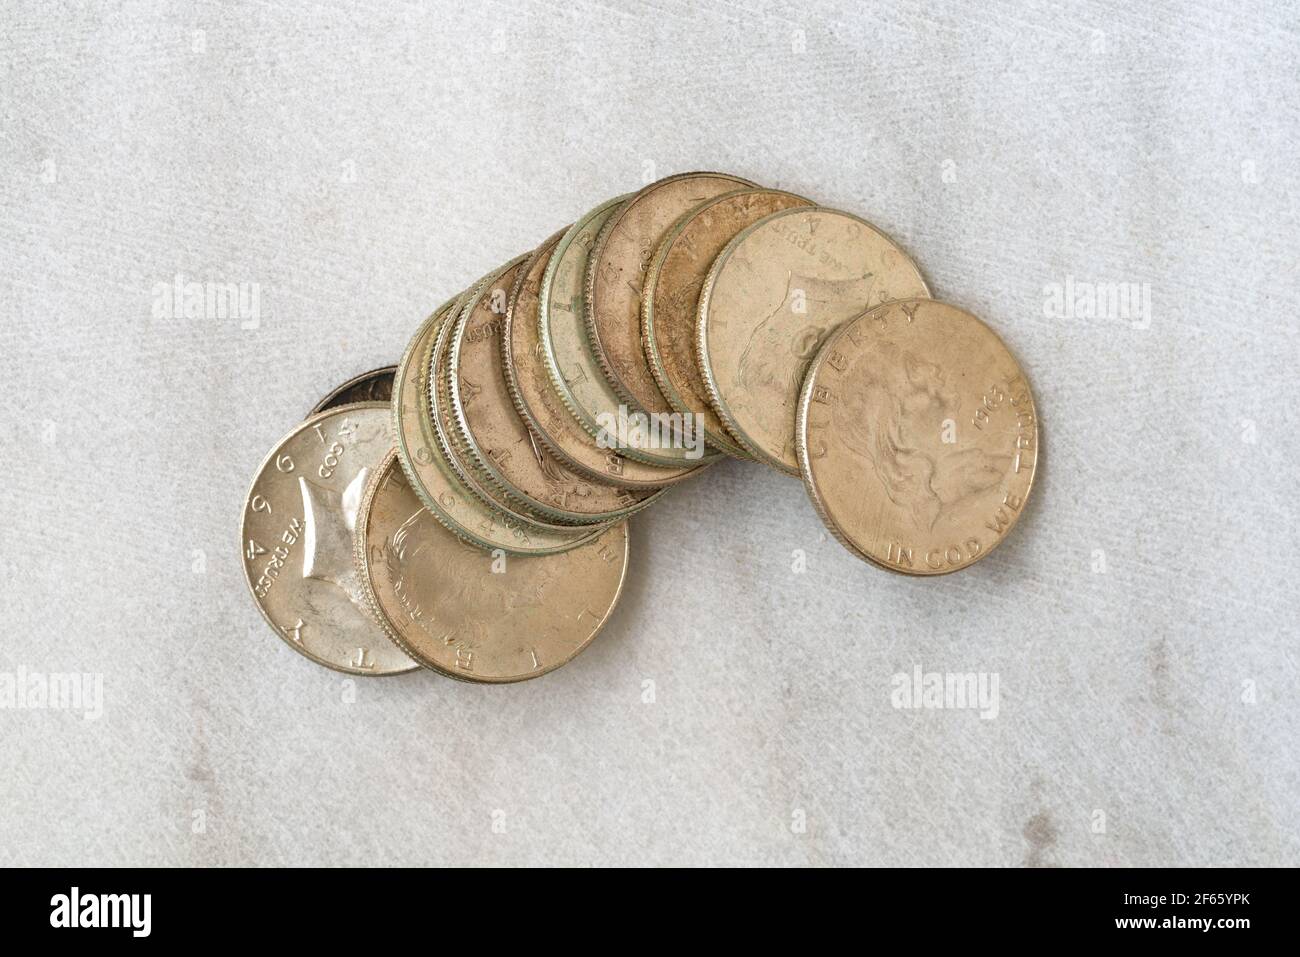 Several loose silver half dollar American coins on a marble surface. Stock Photo